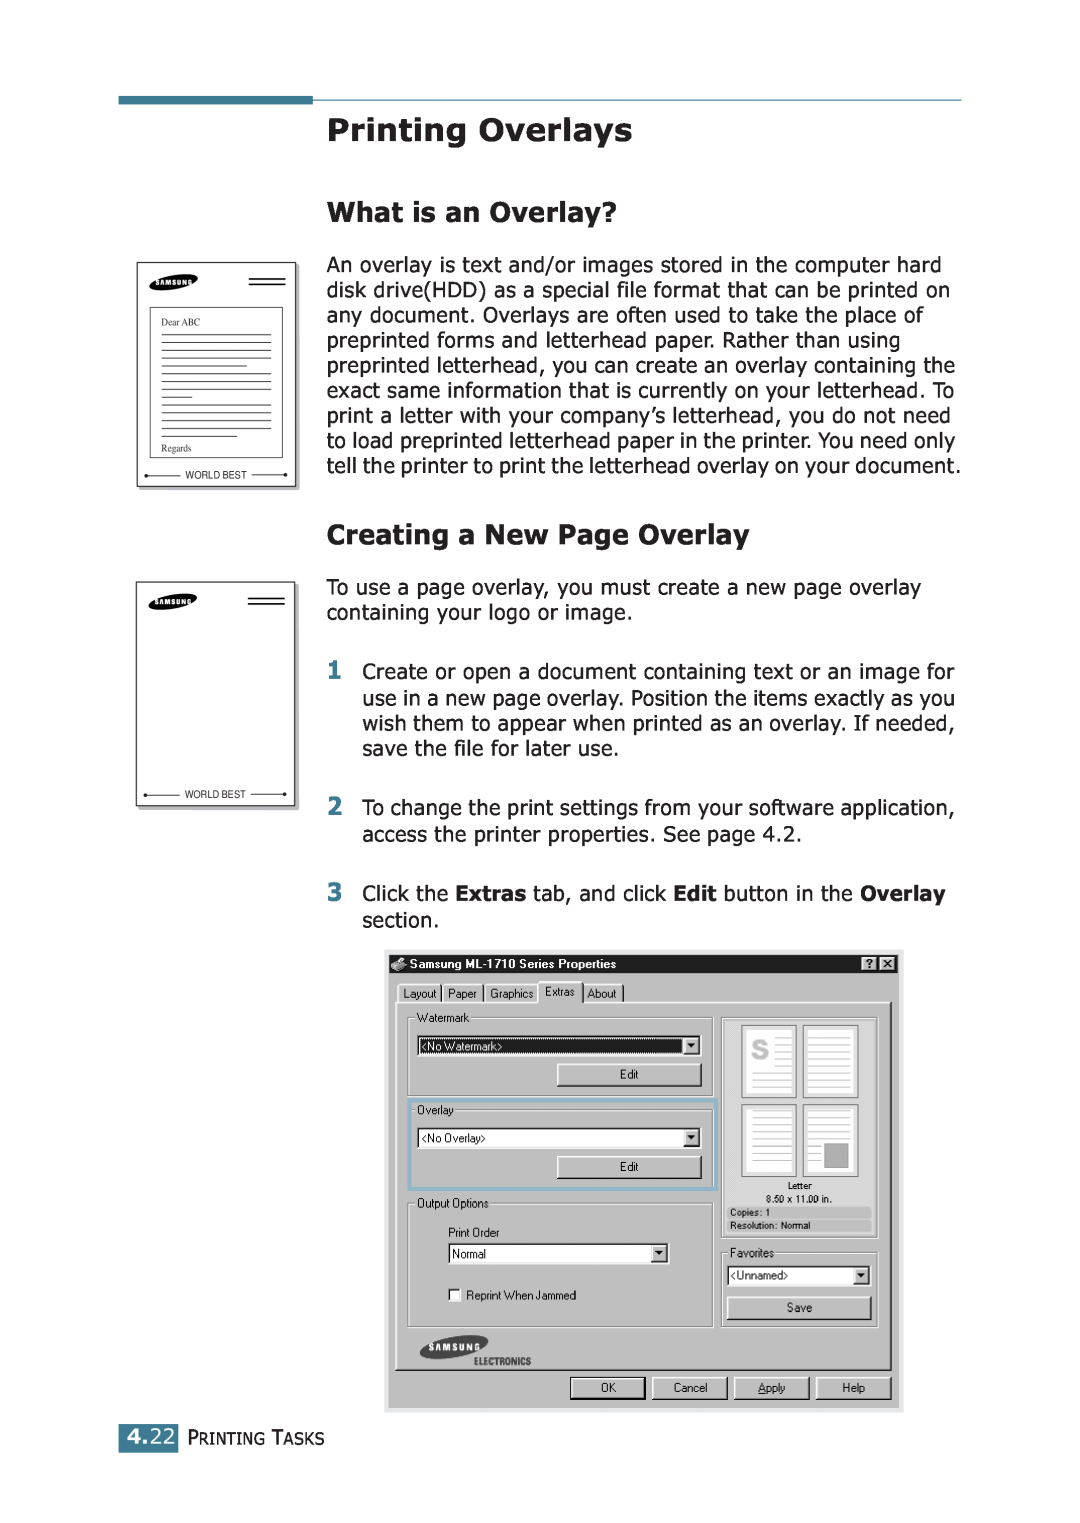 Samsung ML-1710P manual Printing Overlays, What is an Overlay?, Creating a New Page Overlay 